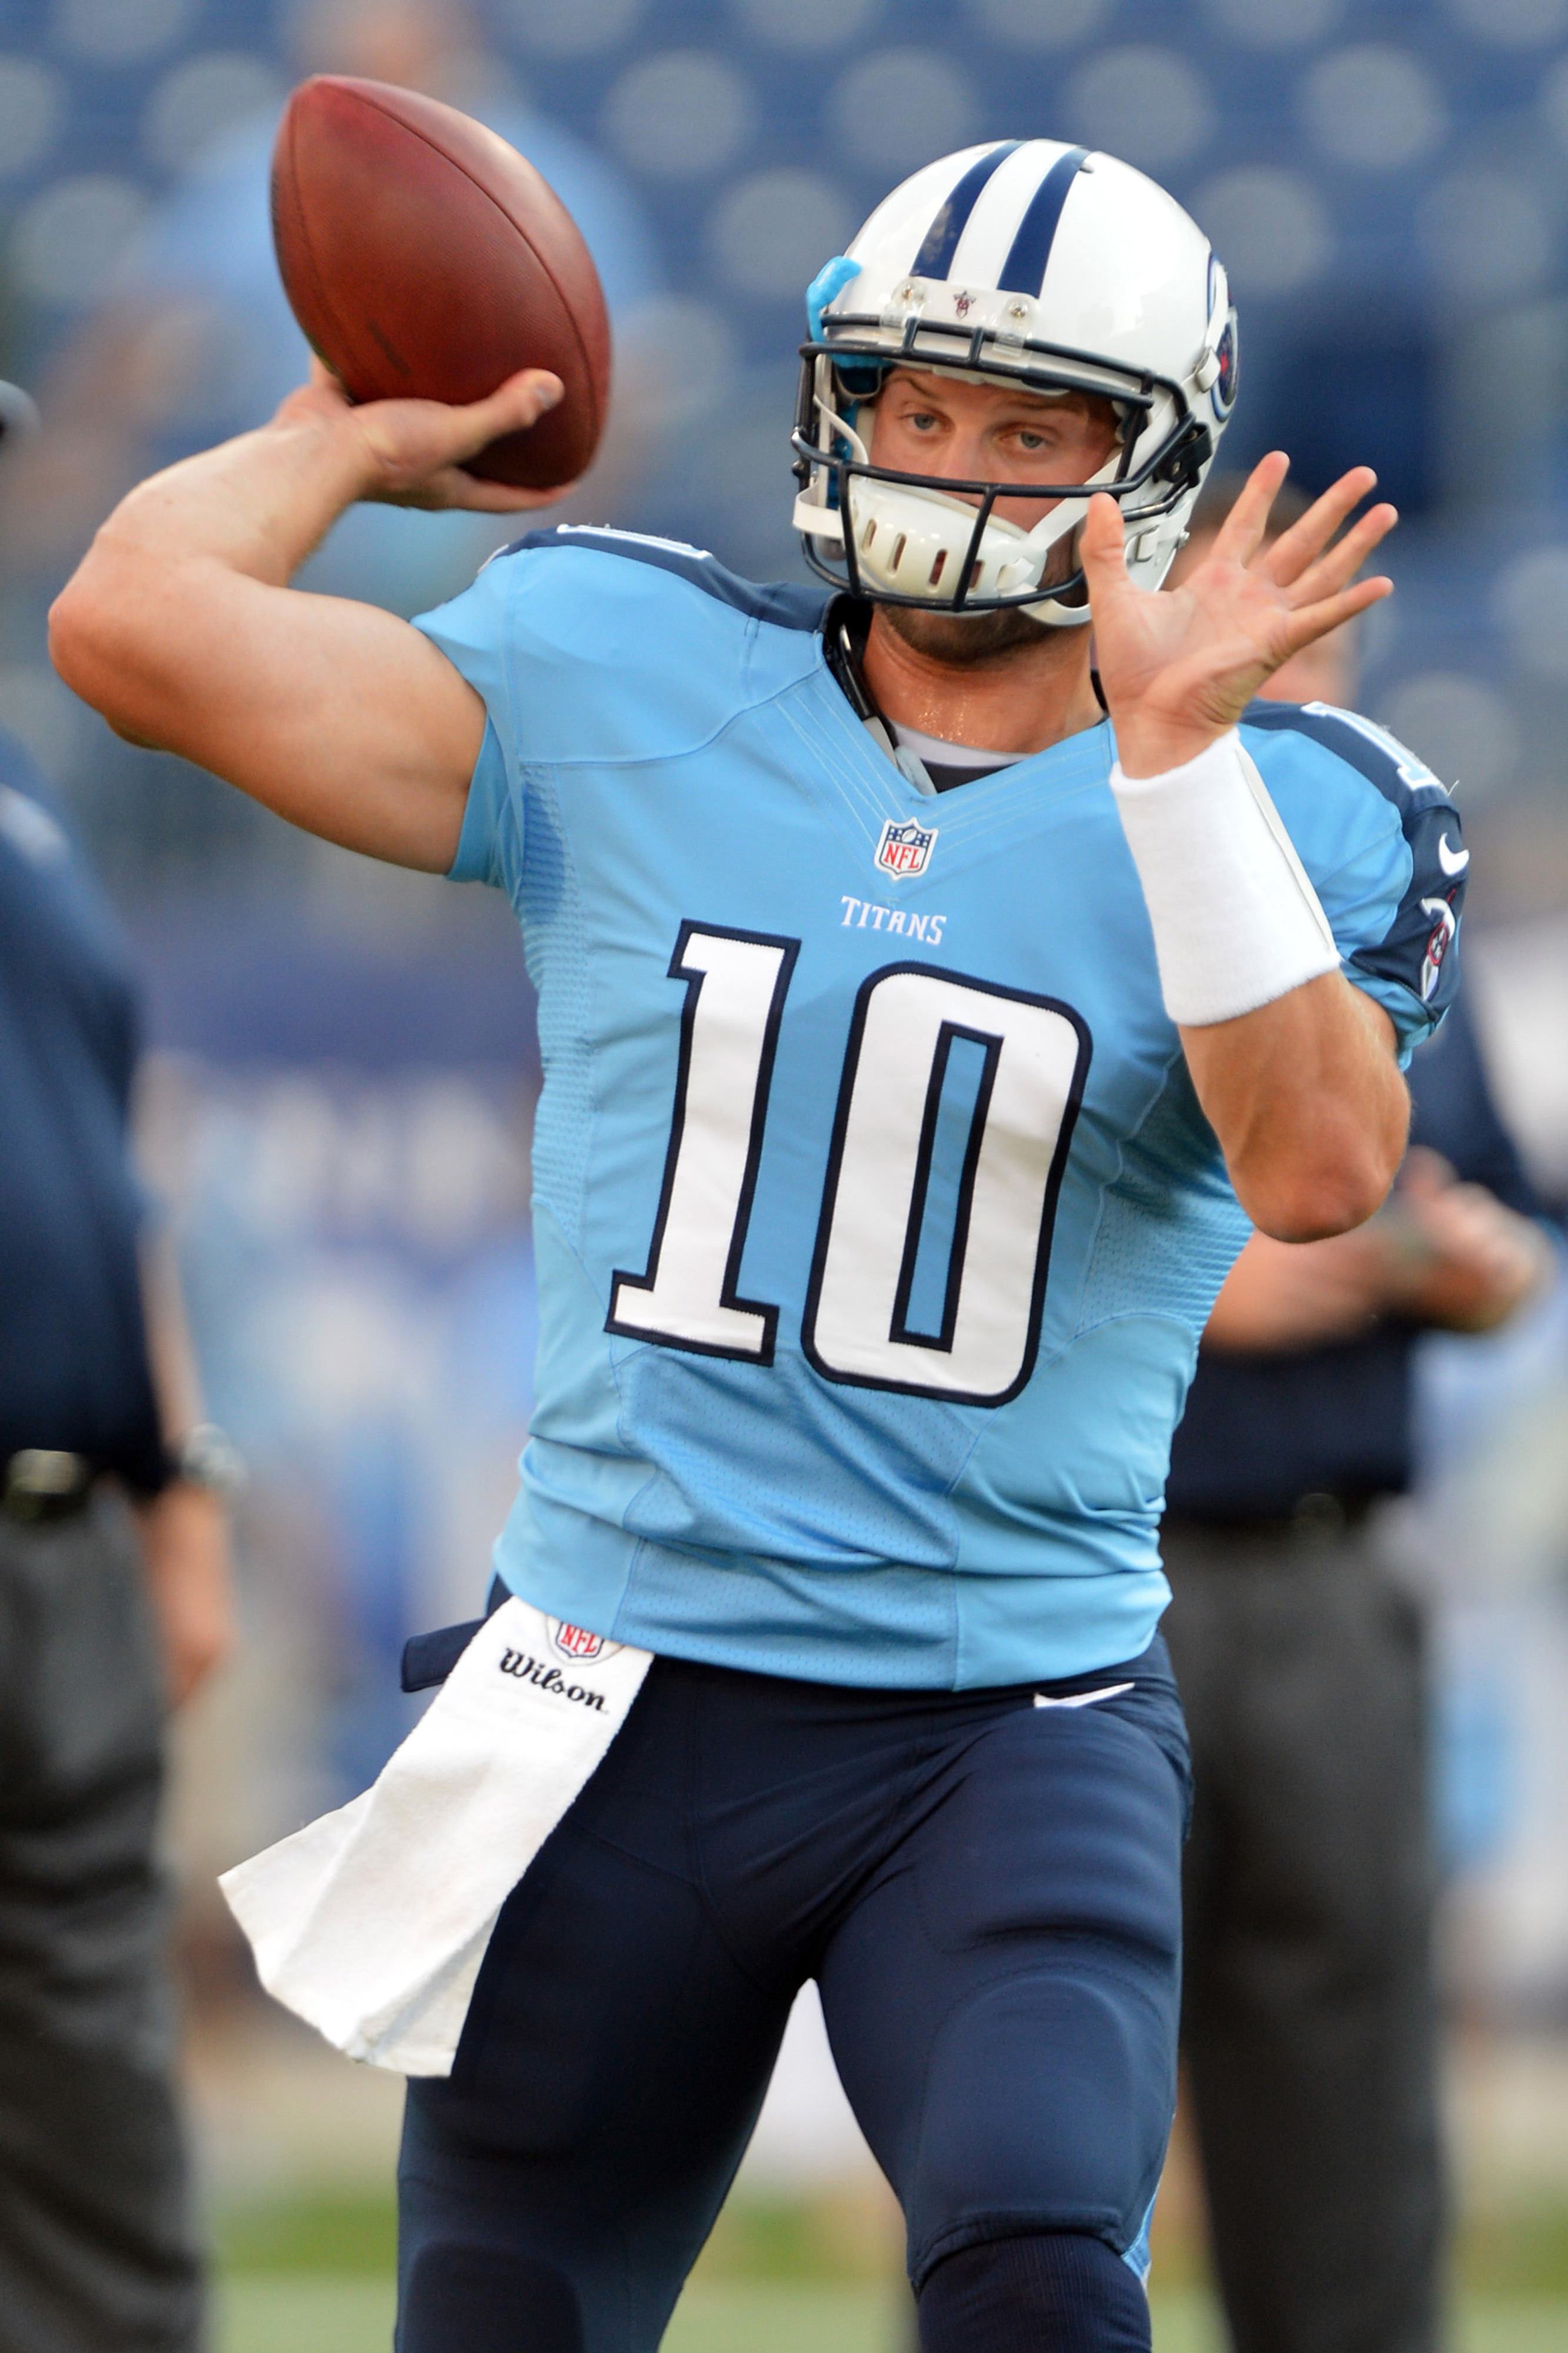 Aug 23, 2012; Nashville, TN, USA; Tennessee Titans quarterback Jake Locker (10) warms up before a game against the Arizona Cardinals at LP Field. Mandatory credit: Don McPeak-US PRESSWIRE